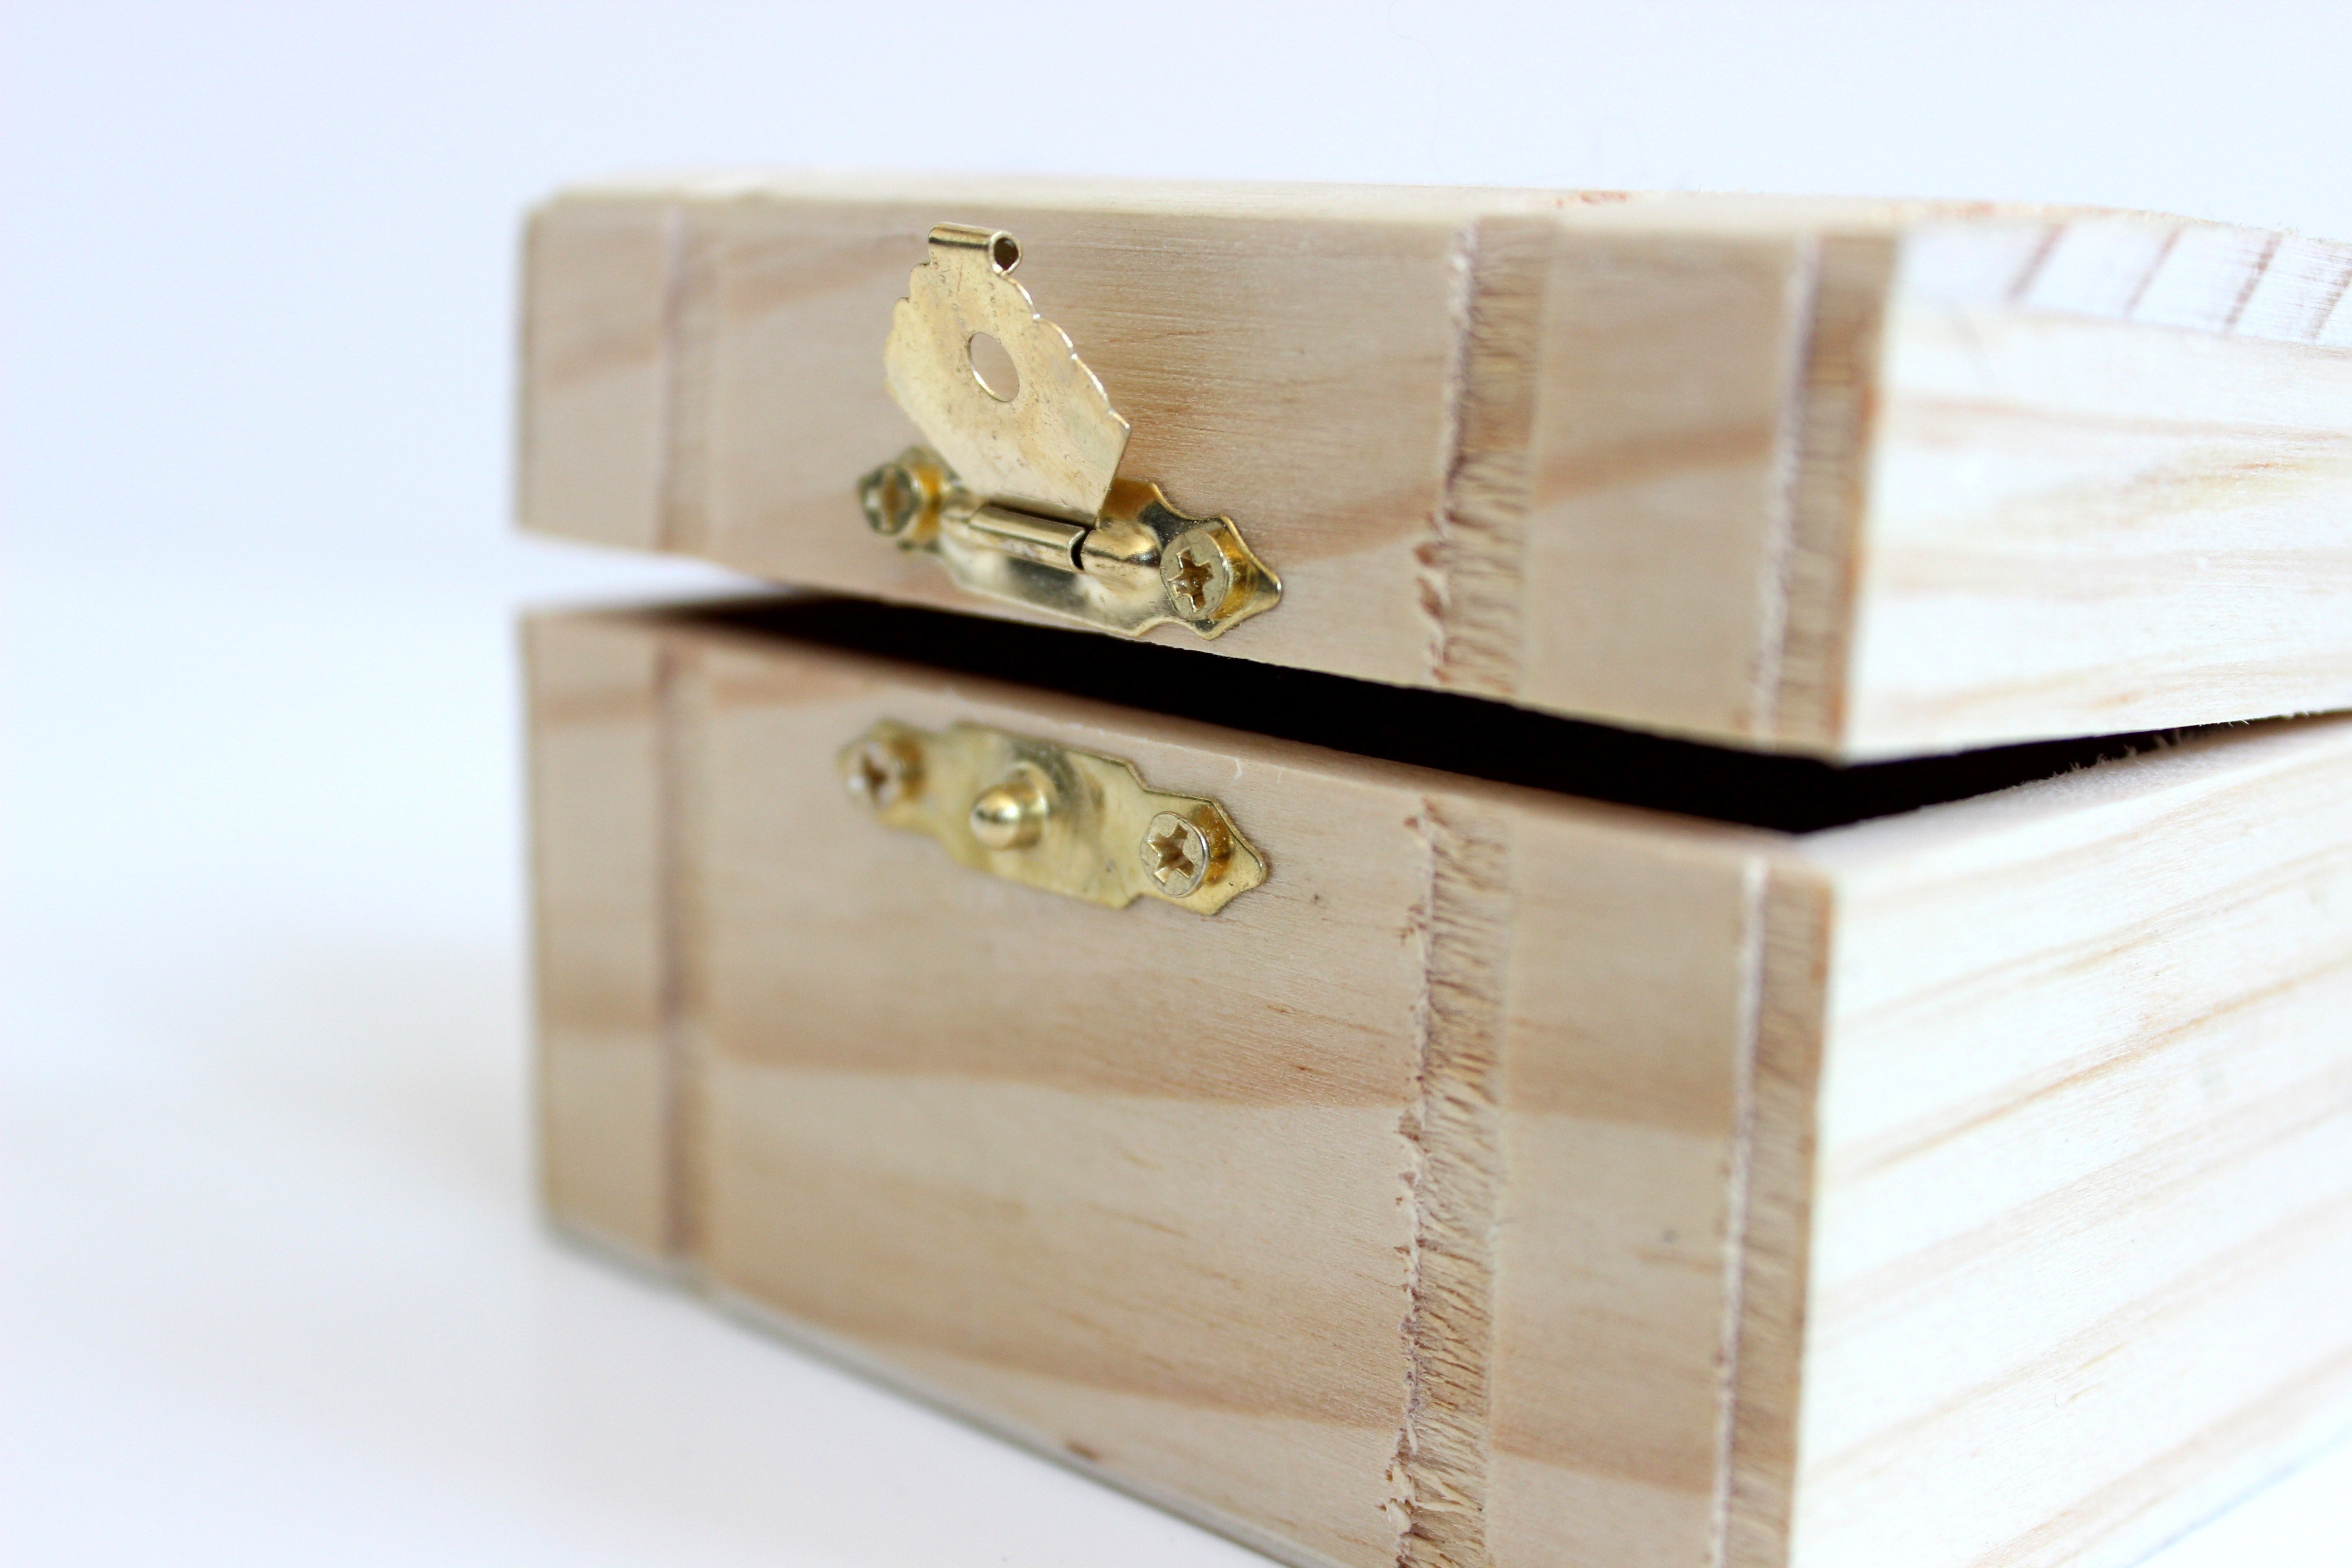 Charley managed to open a locked wooden box from Cindy. | Source: Pexels